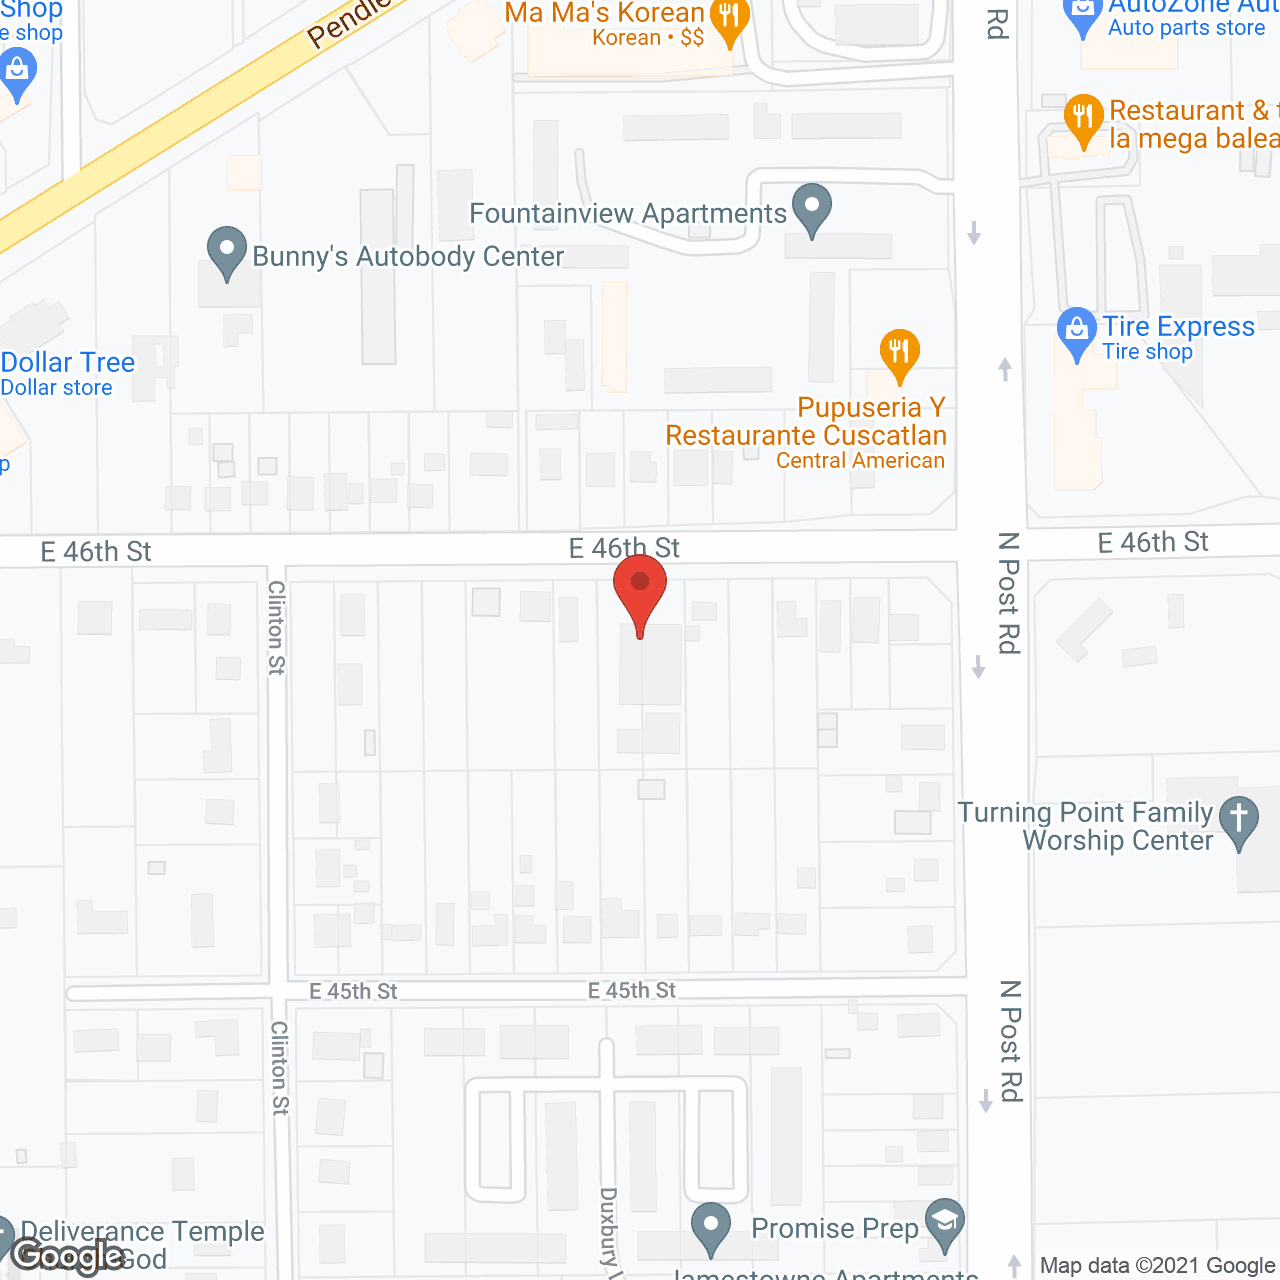 Lawrence Manor Healthcare Ctr in google map